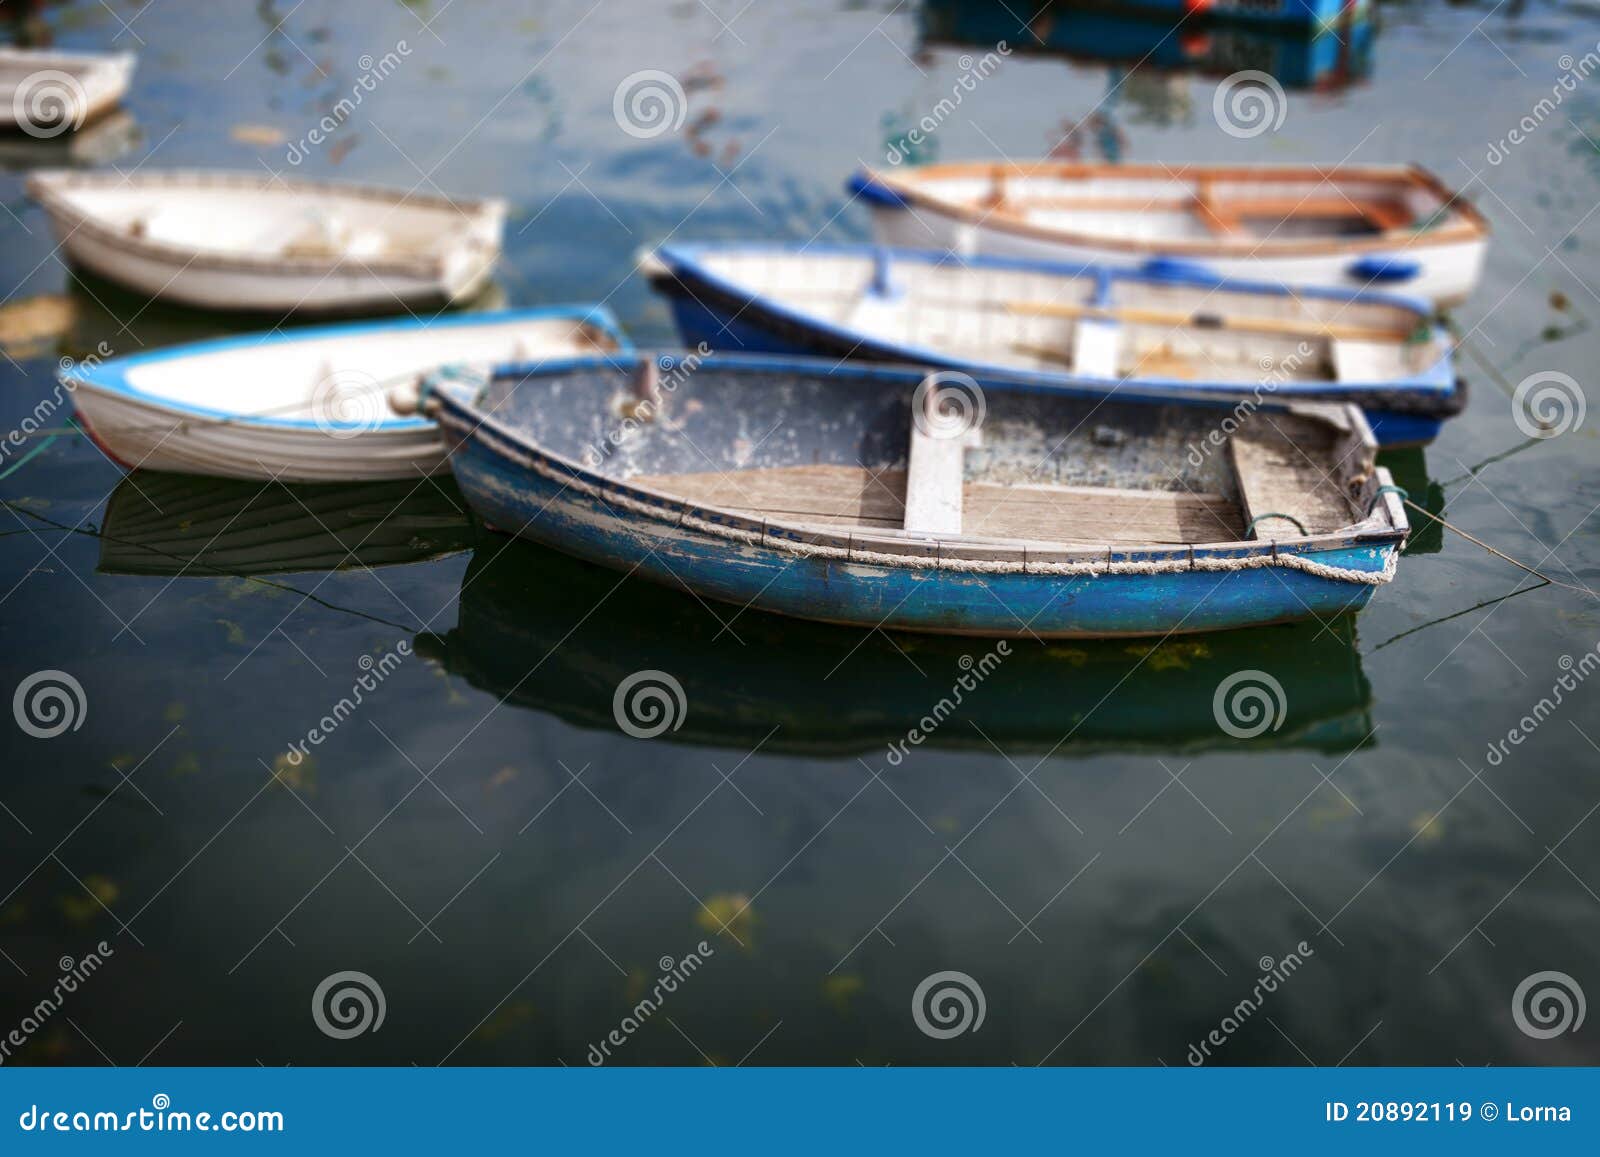 Rowing boats at anchor. Small fishing vessels on water.